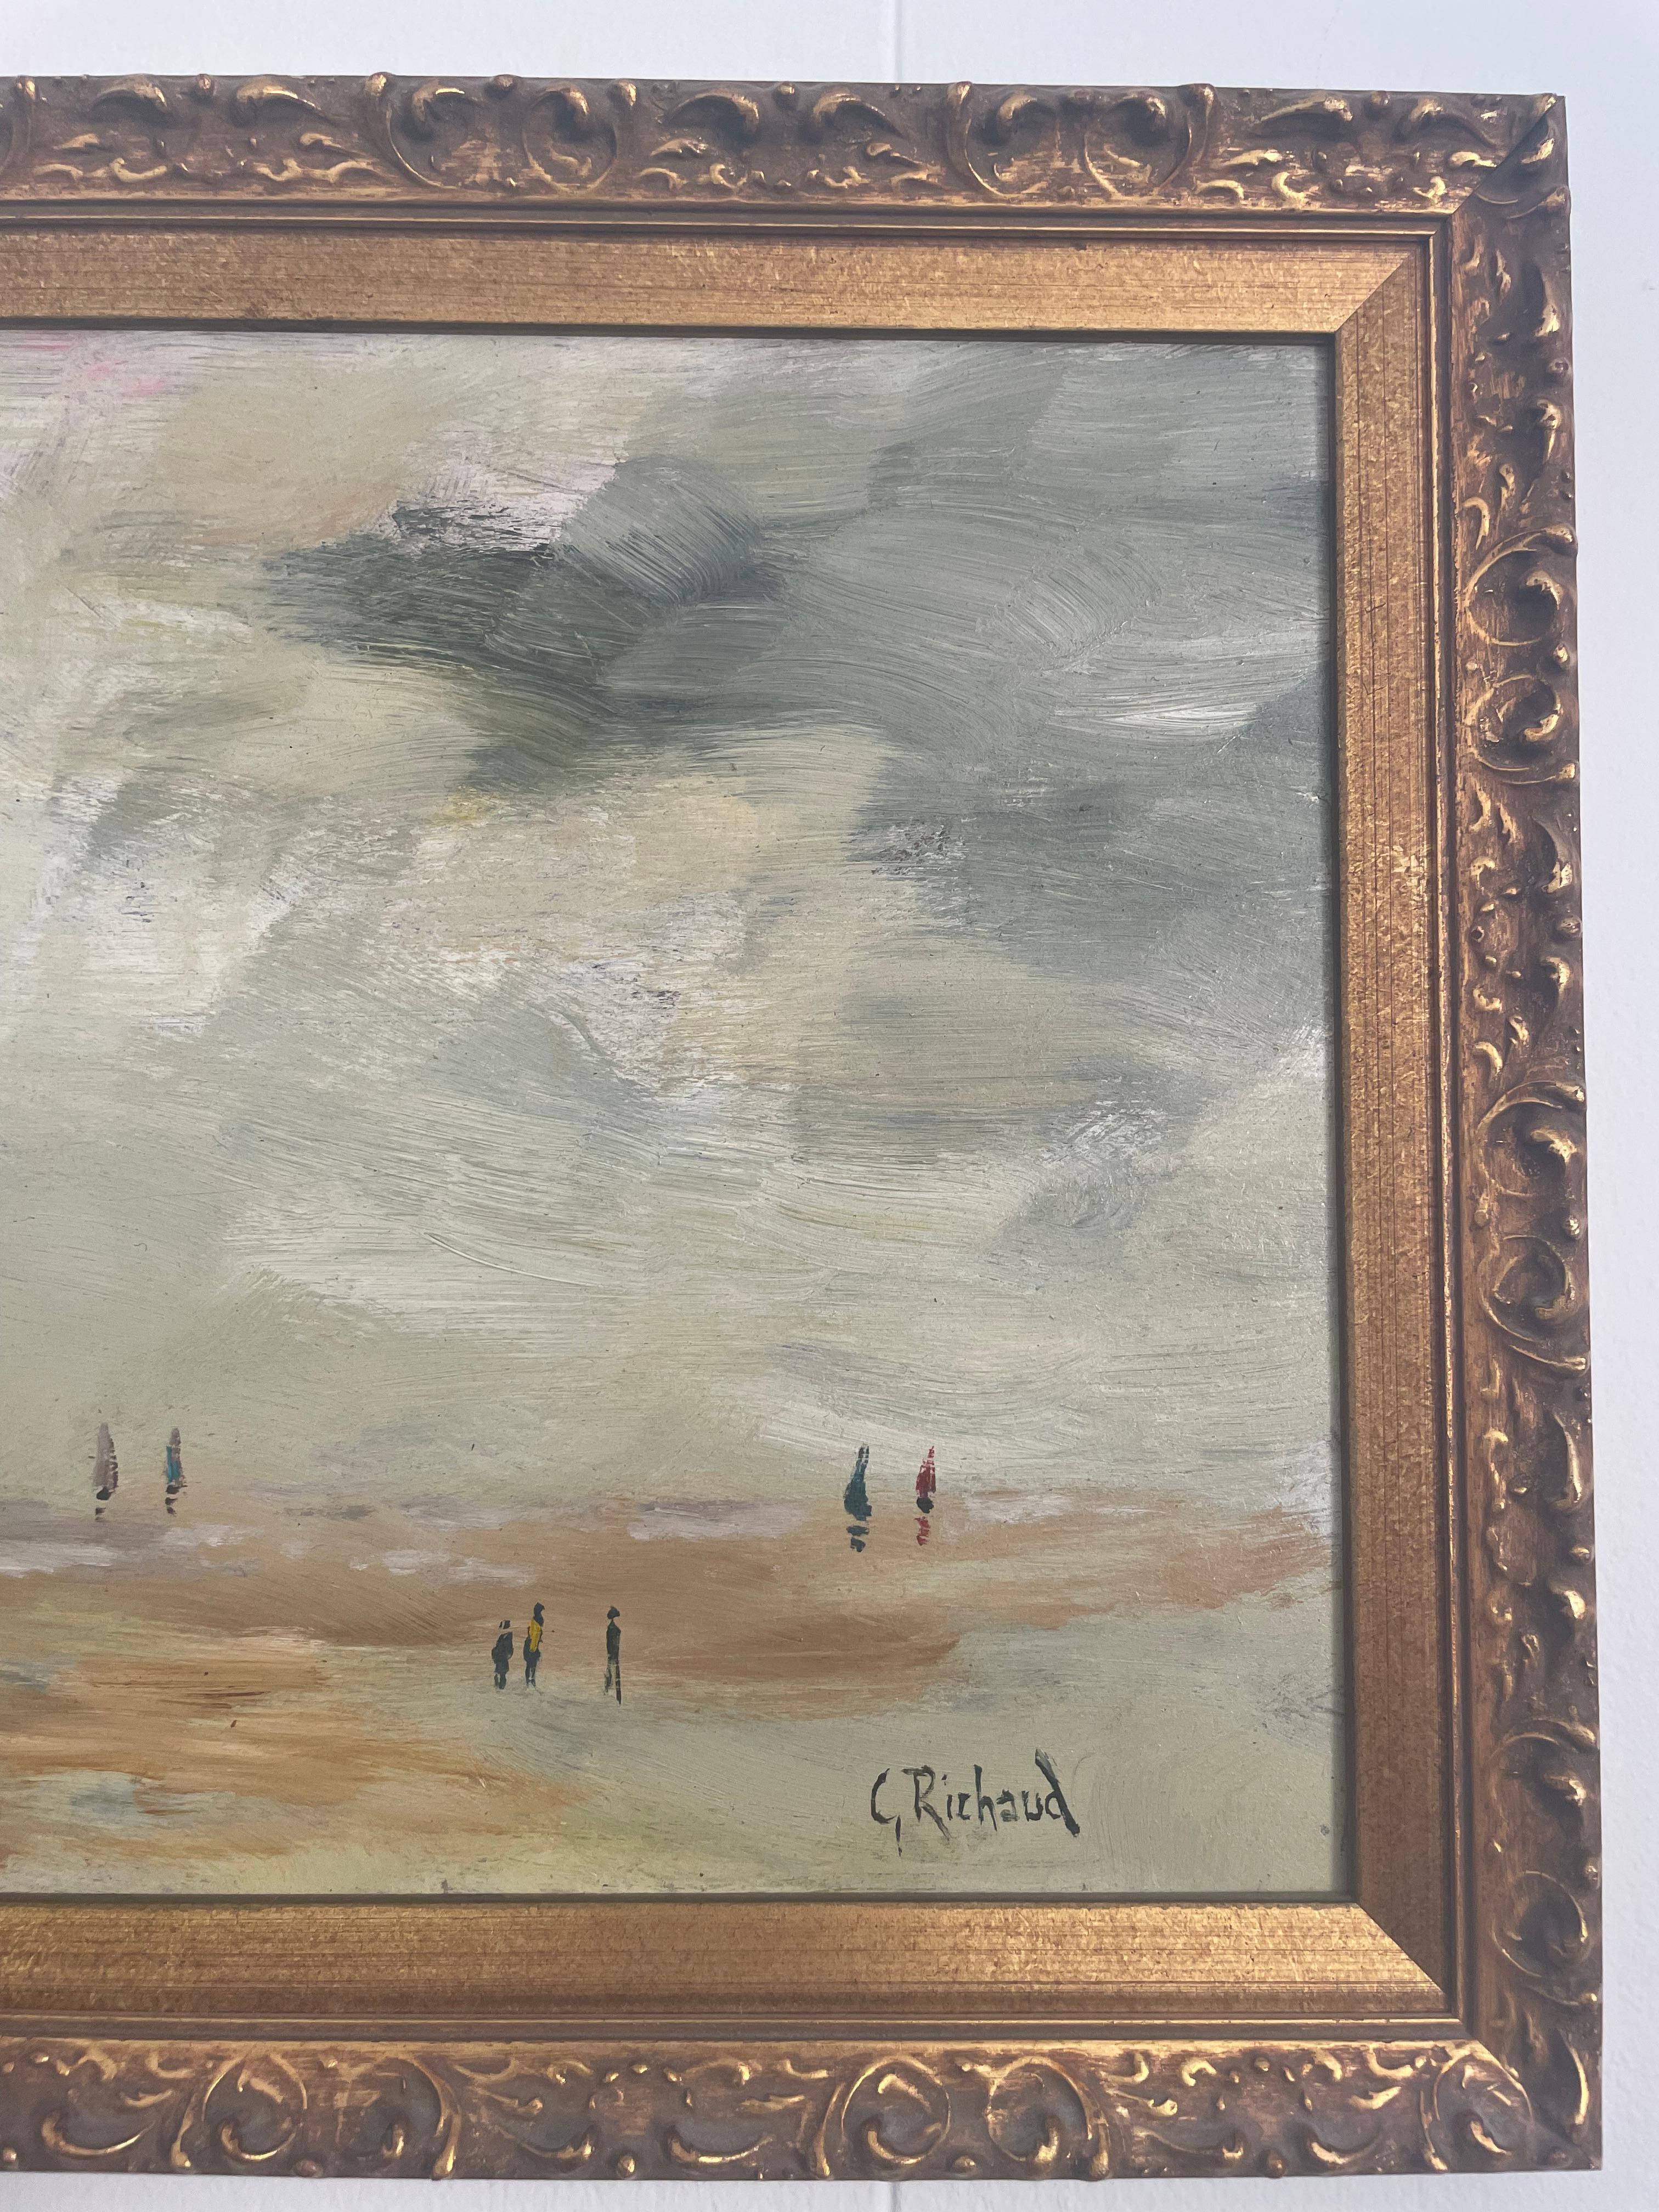 Oil on canvas signed by the French artist Georges Richaud. 
Painting depicts people on a beach shore, with a French flag waving from the breeze. 
G.Richaud is an accredited 20th-century French artist who was exhibited in France and England.
 